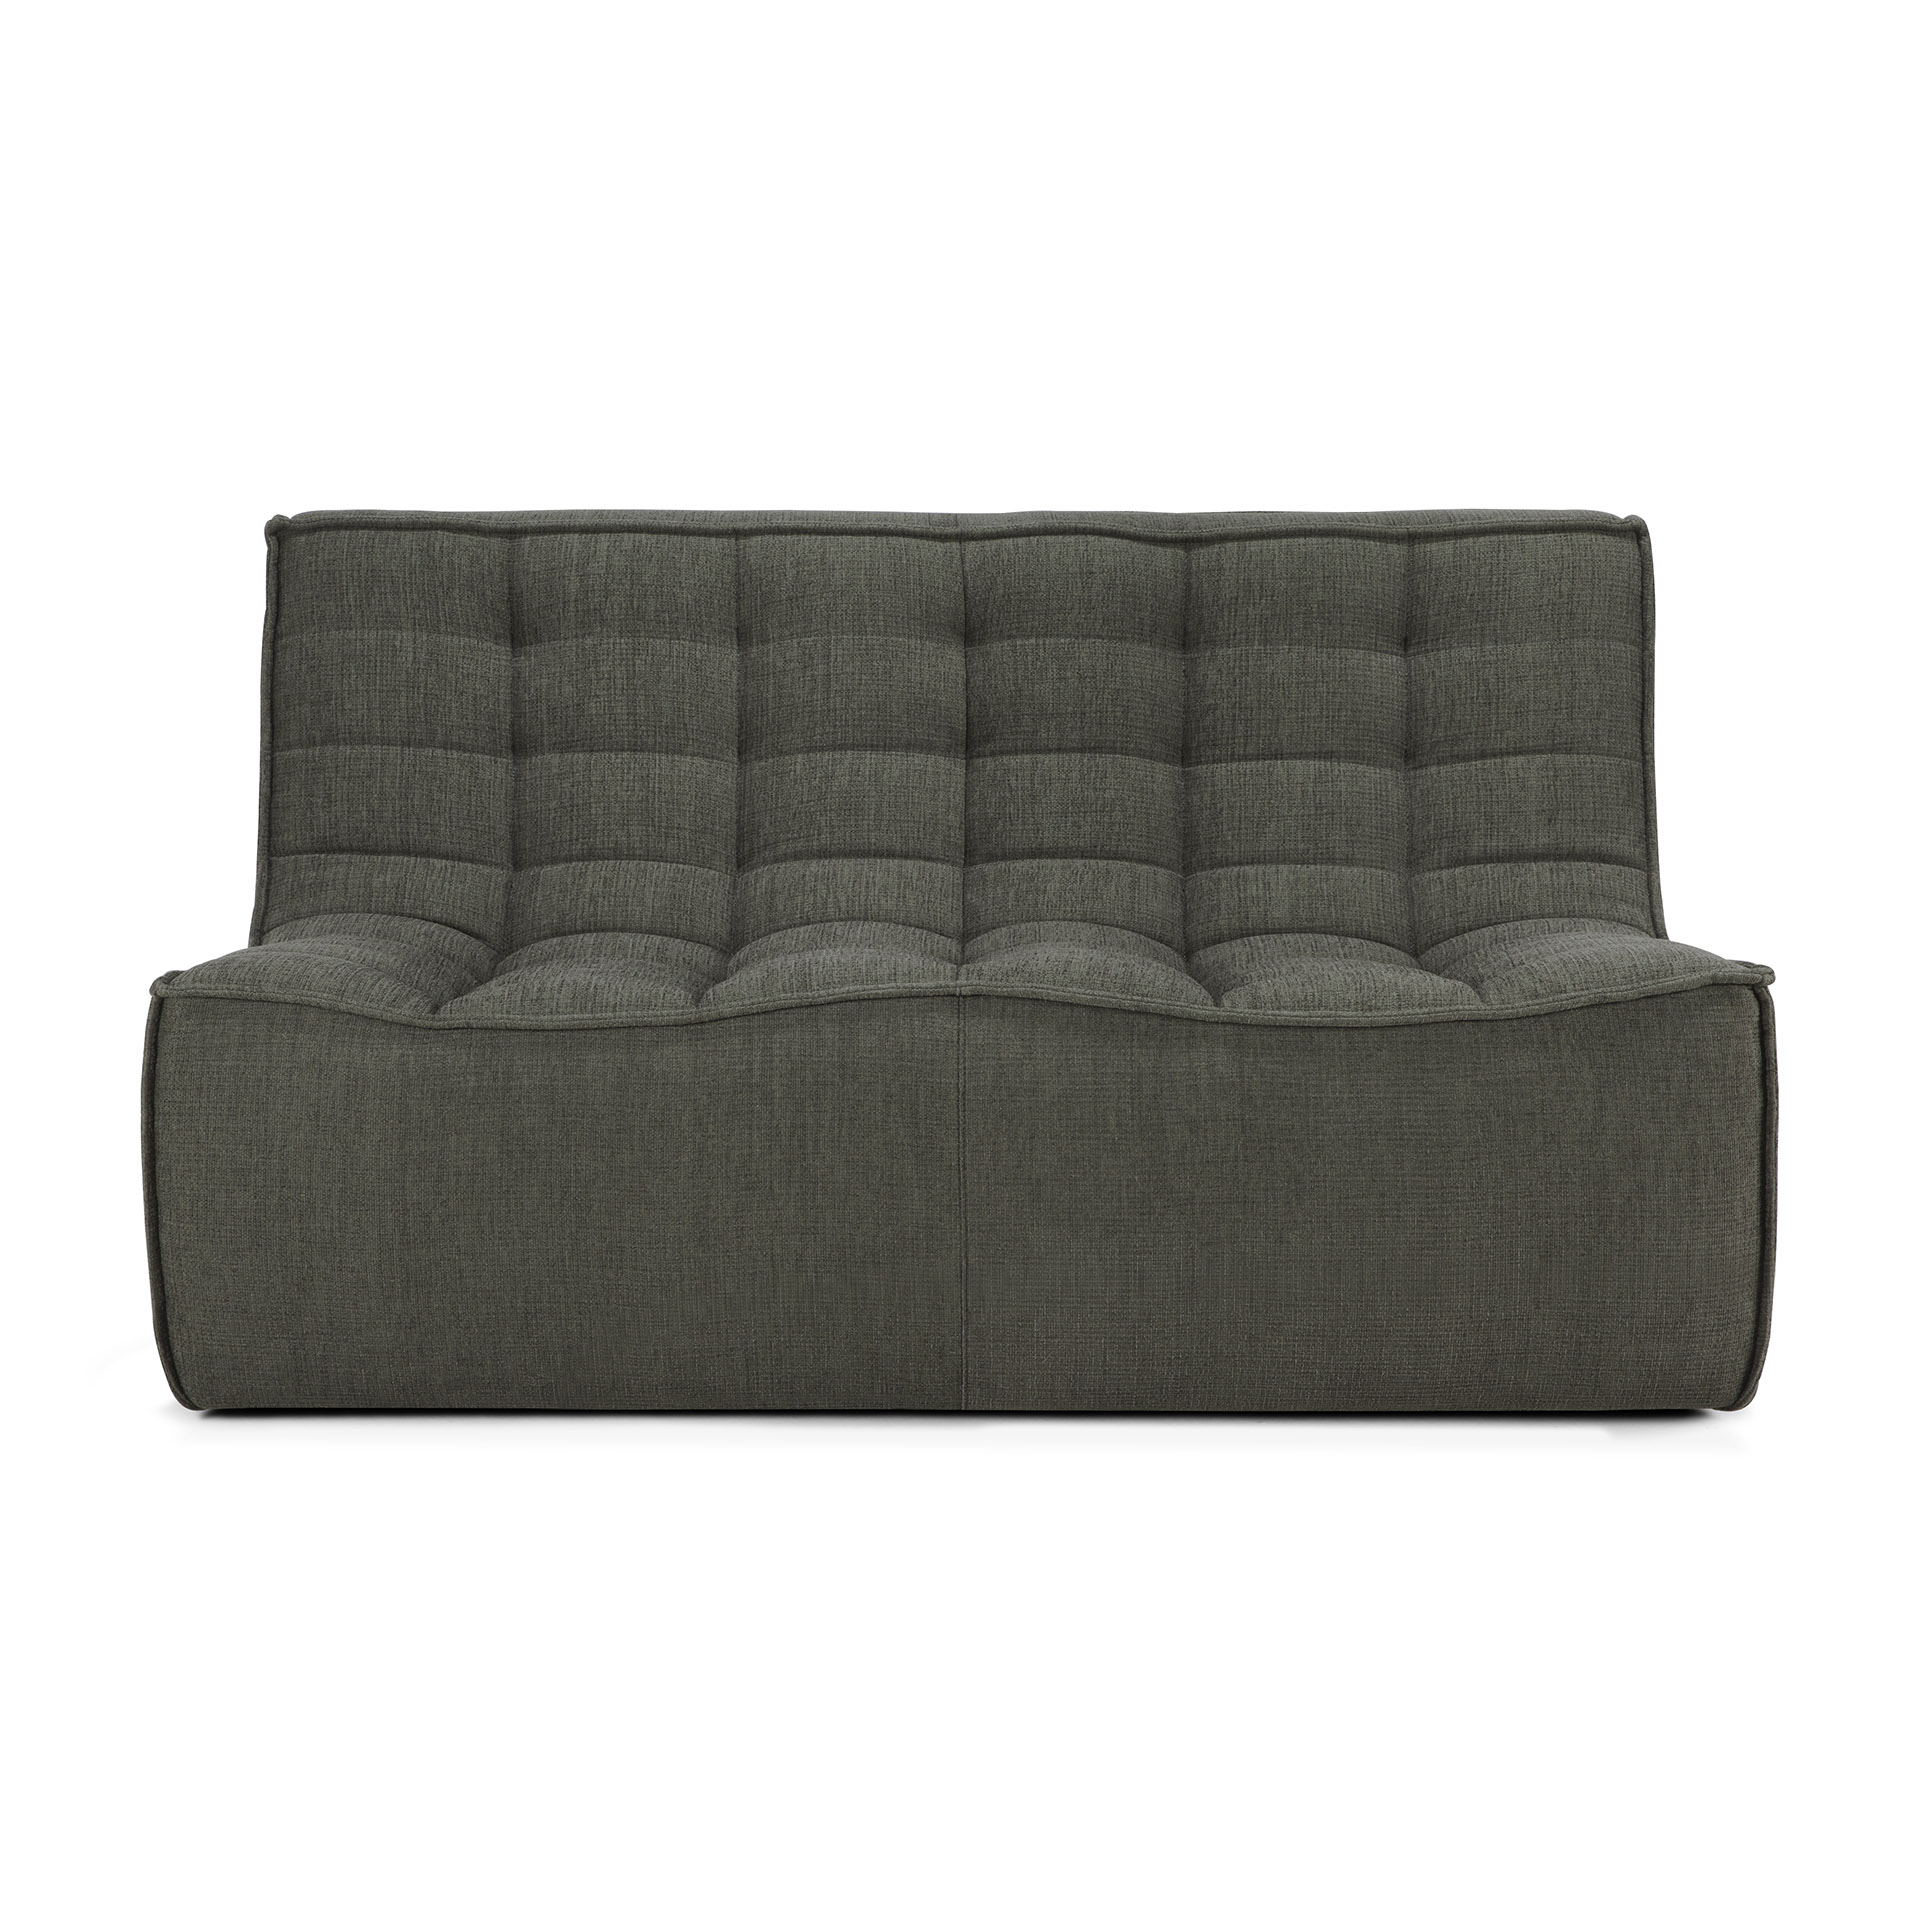 20255_Sofa_N701_2_seater_Moss_Eco_fabric_front_cut_WEB-1